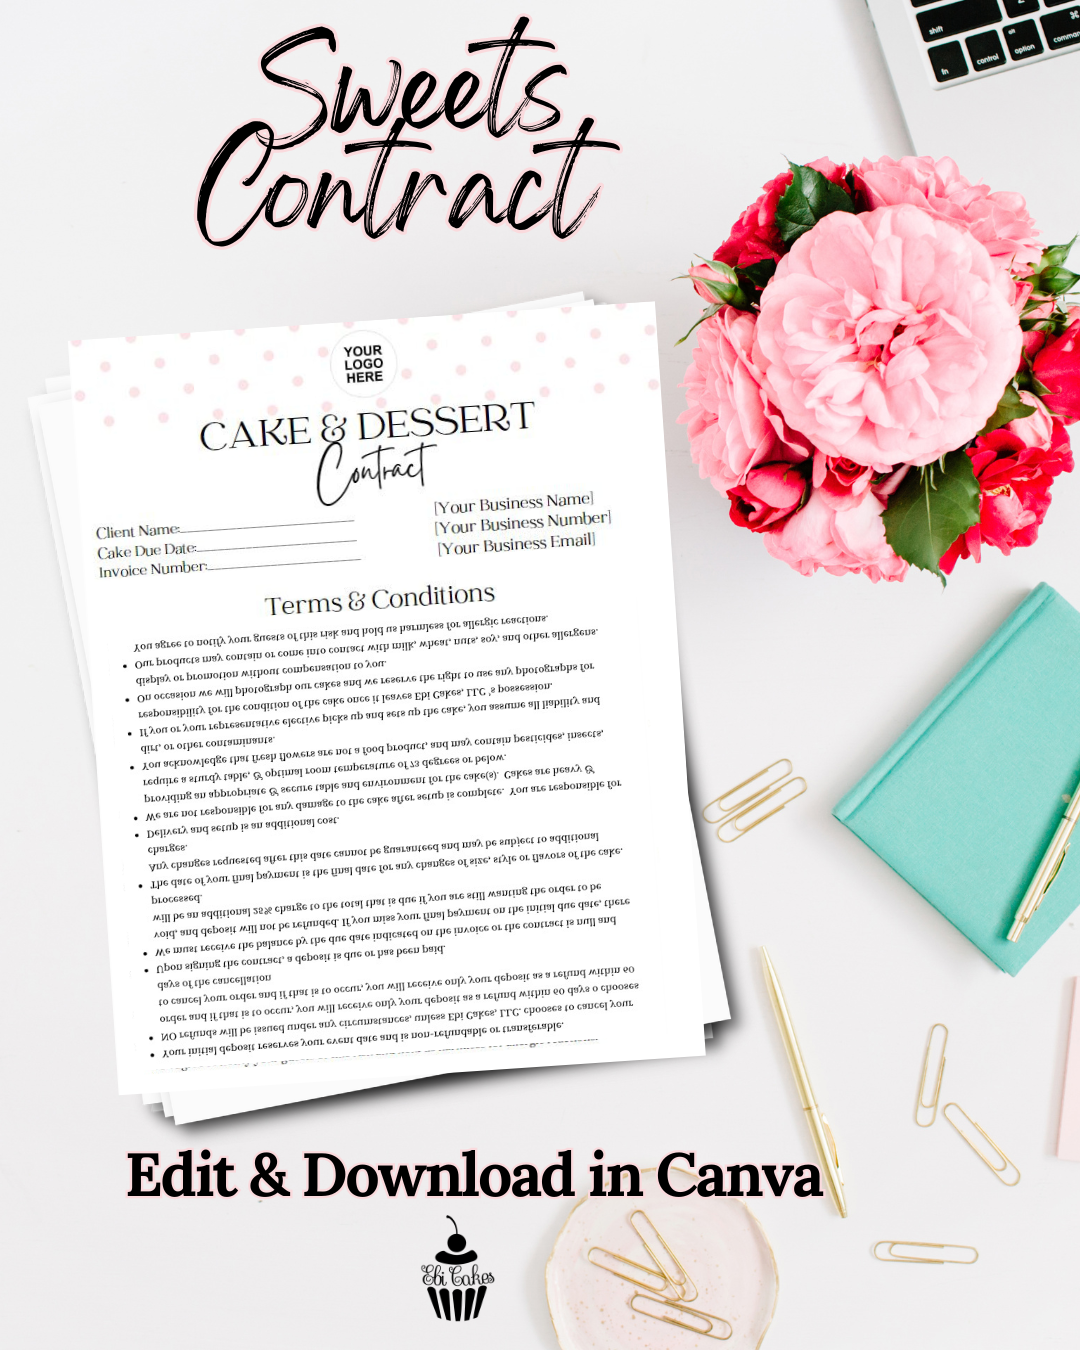 Cake & Sweets Contract